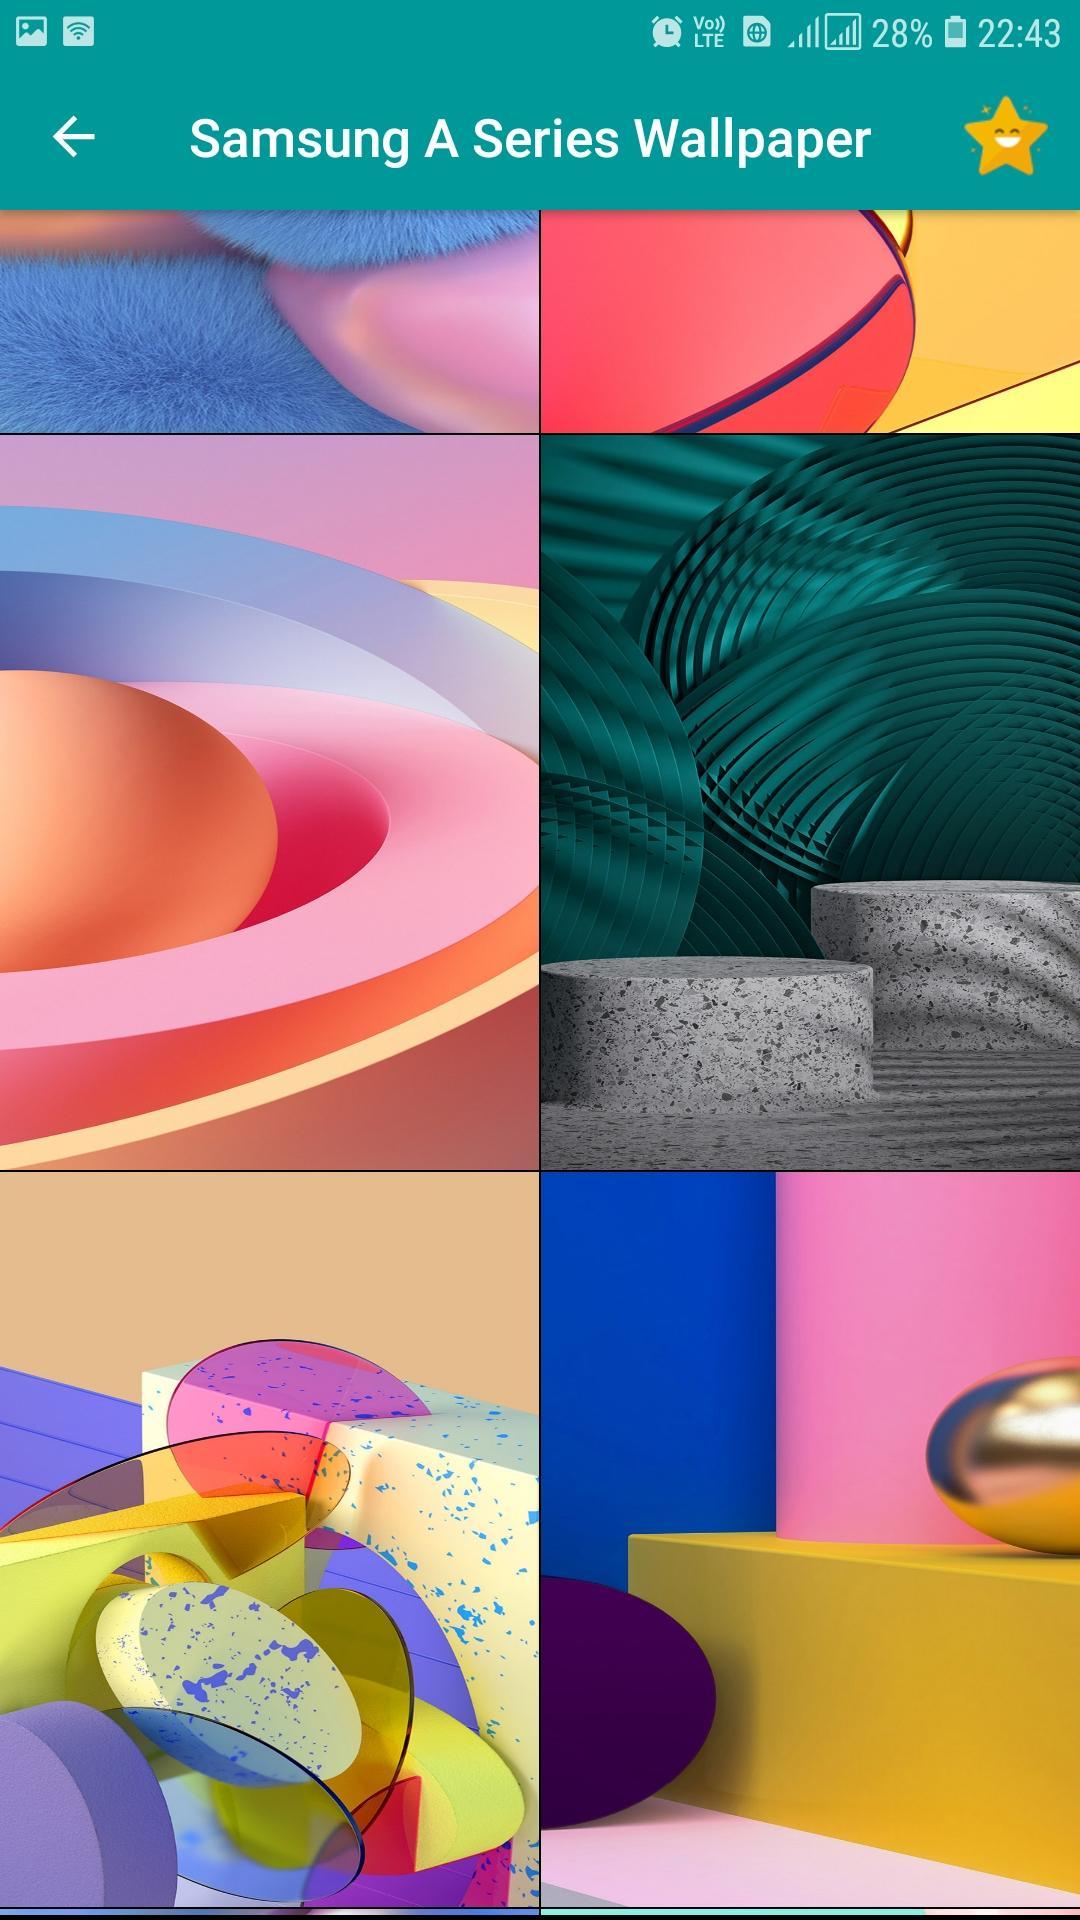 Android 用の Wallpaper For Samsung 0 0 A60 A80 Wallpapers Apk をダウンロード